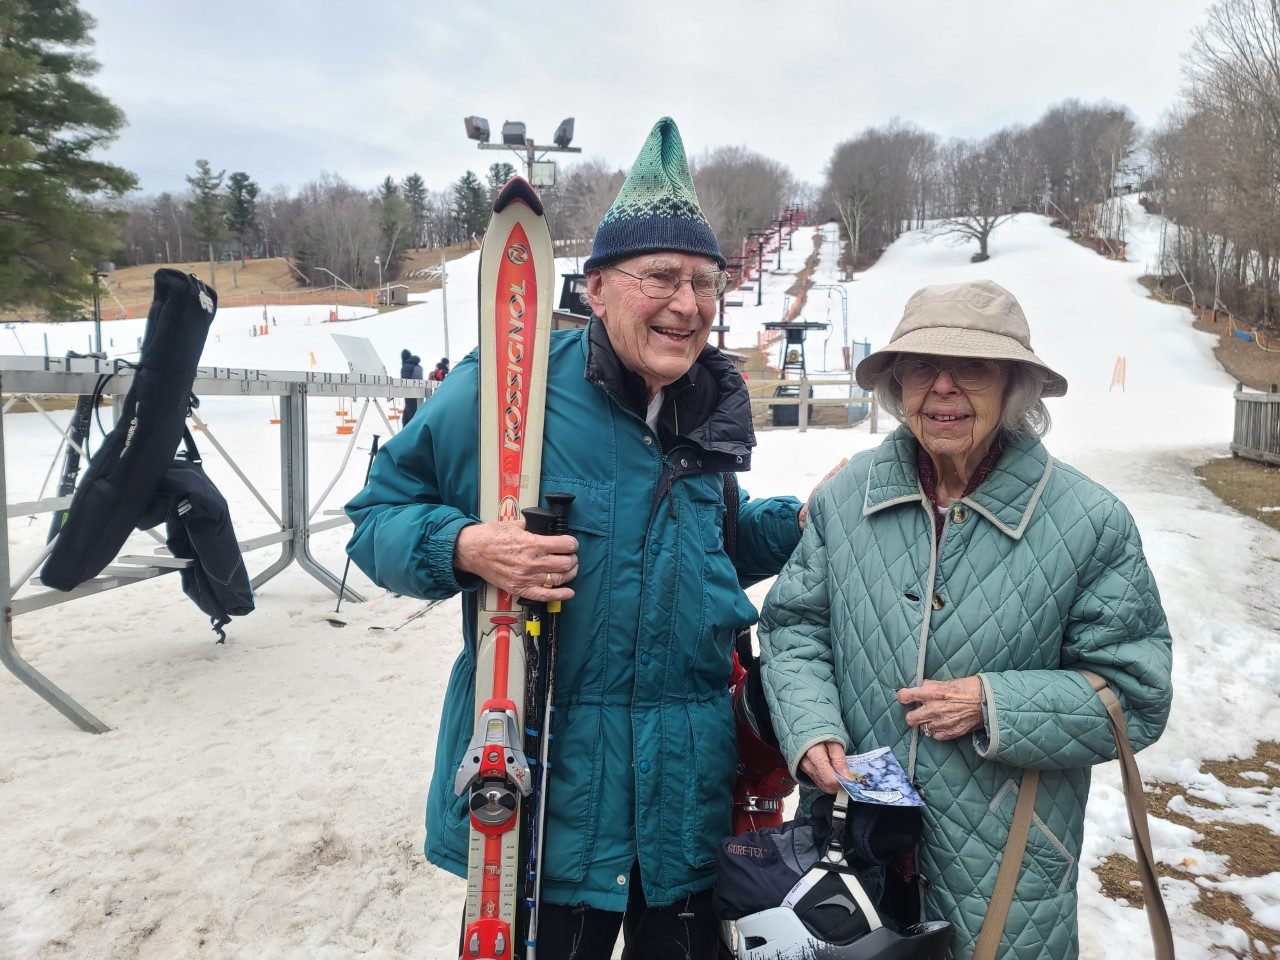 Skier Retires From Sport After 90 Years On the Slopes